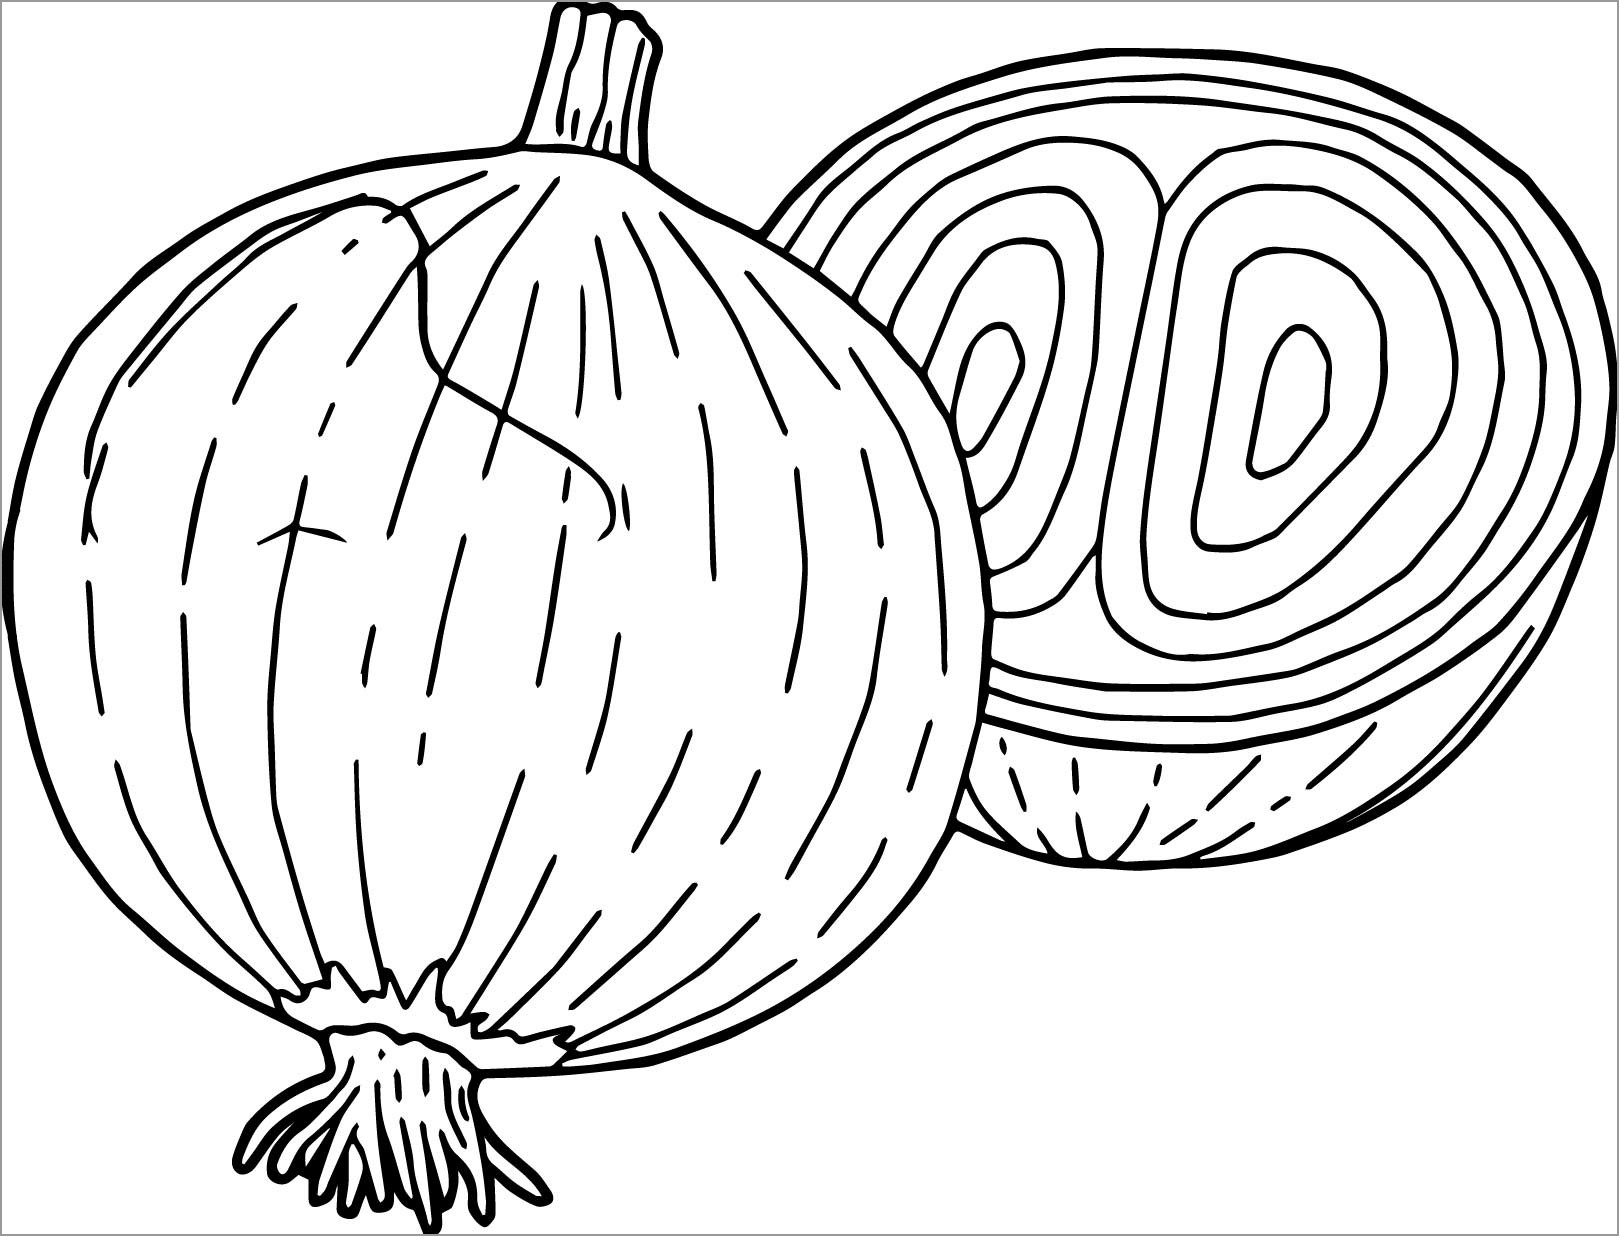 Onions Coloring Pages - ColoringBay